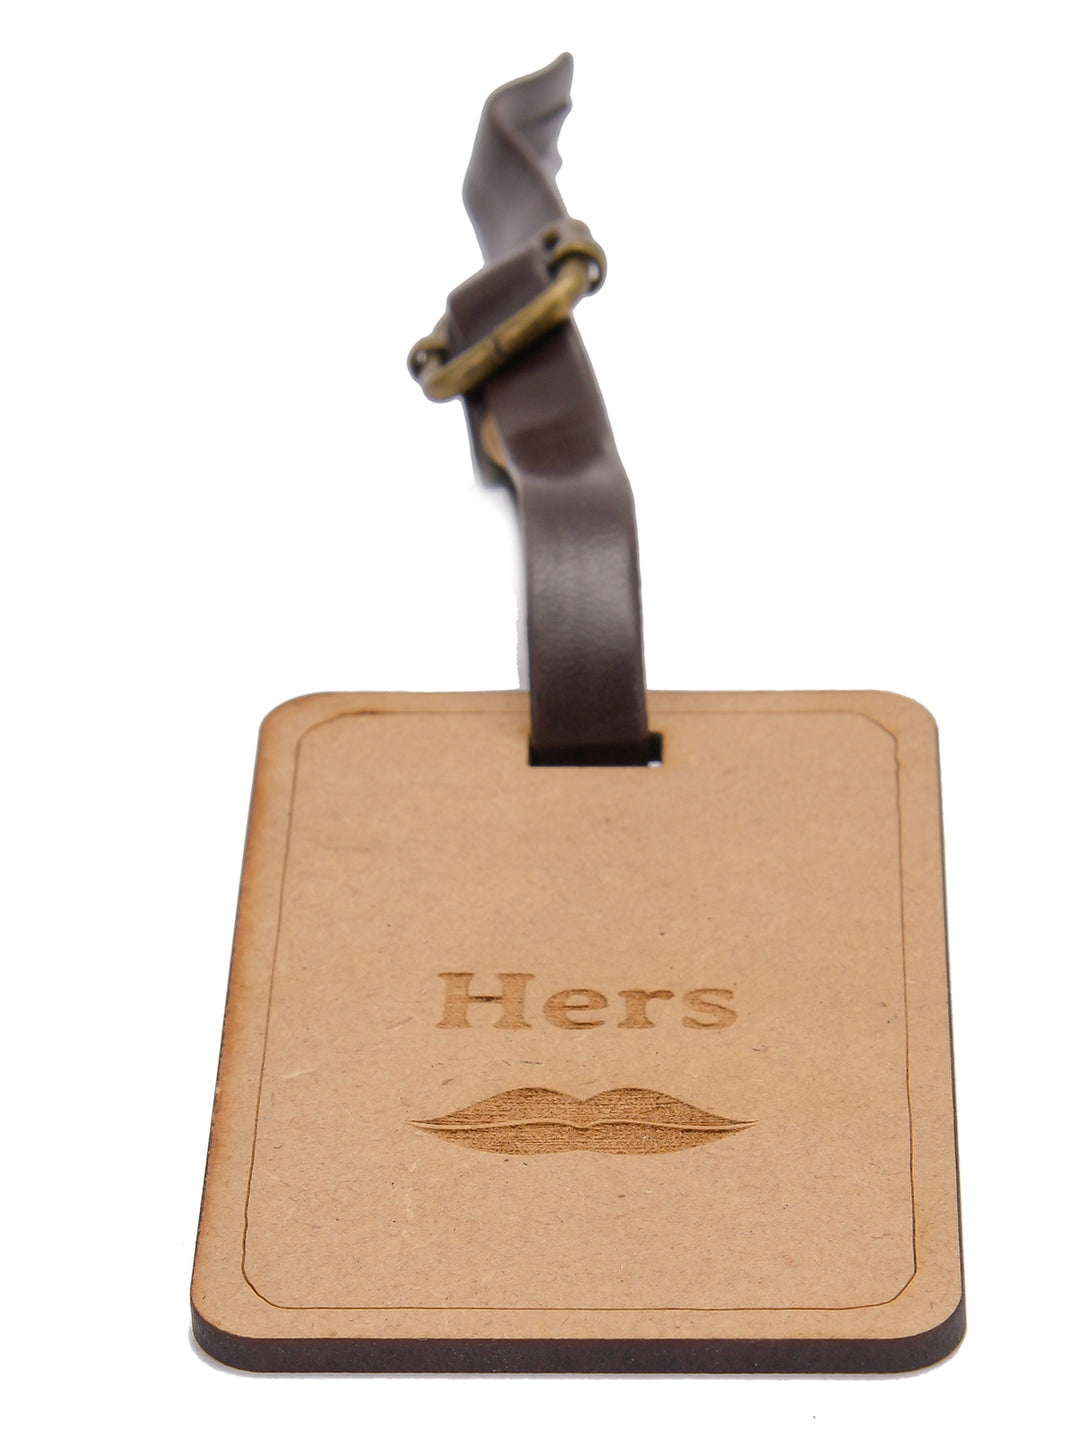 Her - Engraved Wooden Luggage Tag